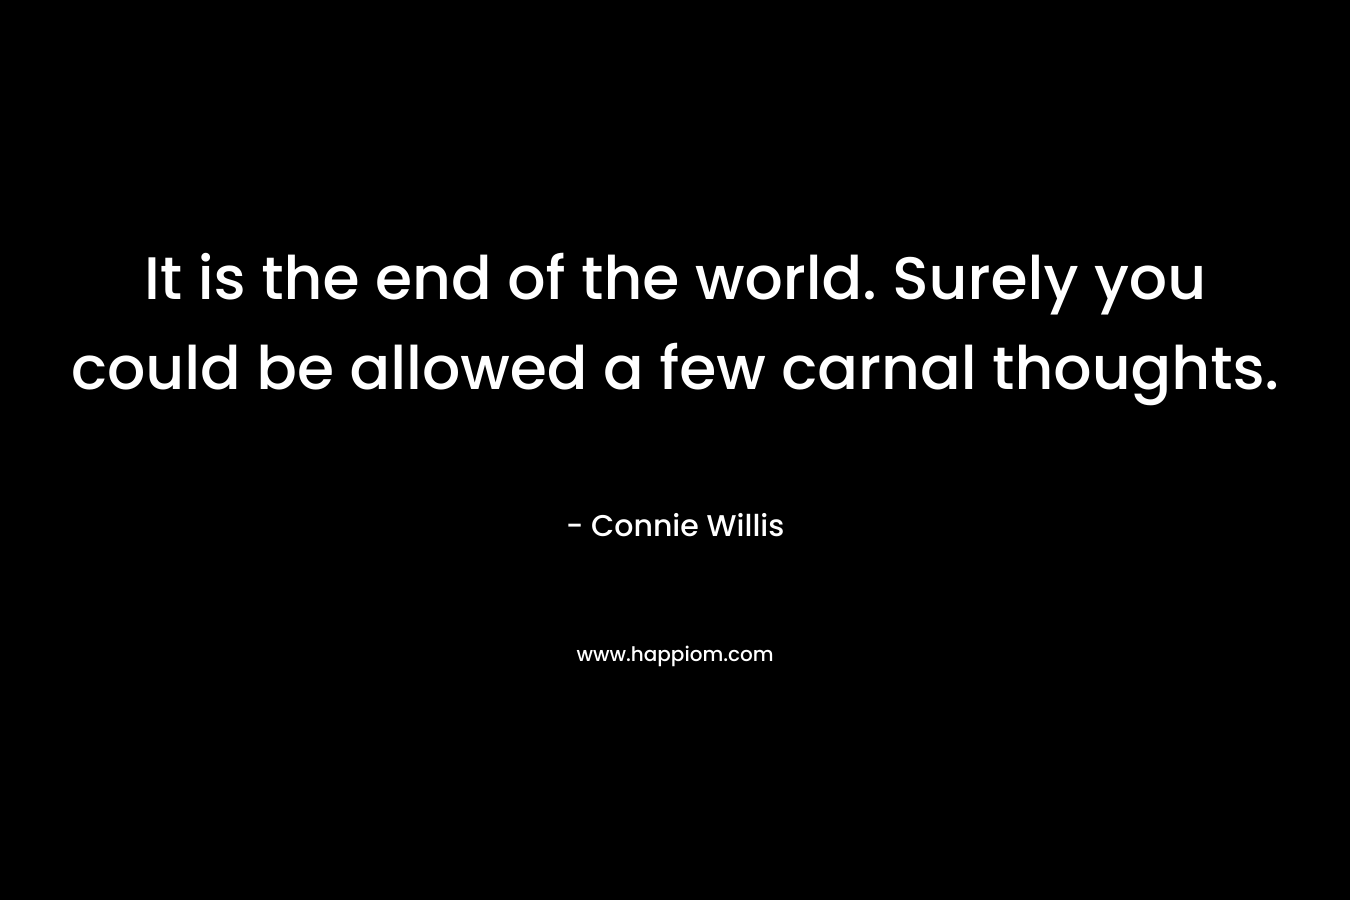 It is the end of the world. Surely you could be allowed a few carnal thoughts. – Connie Willis